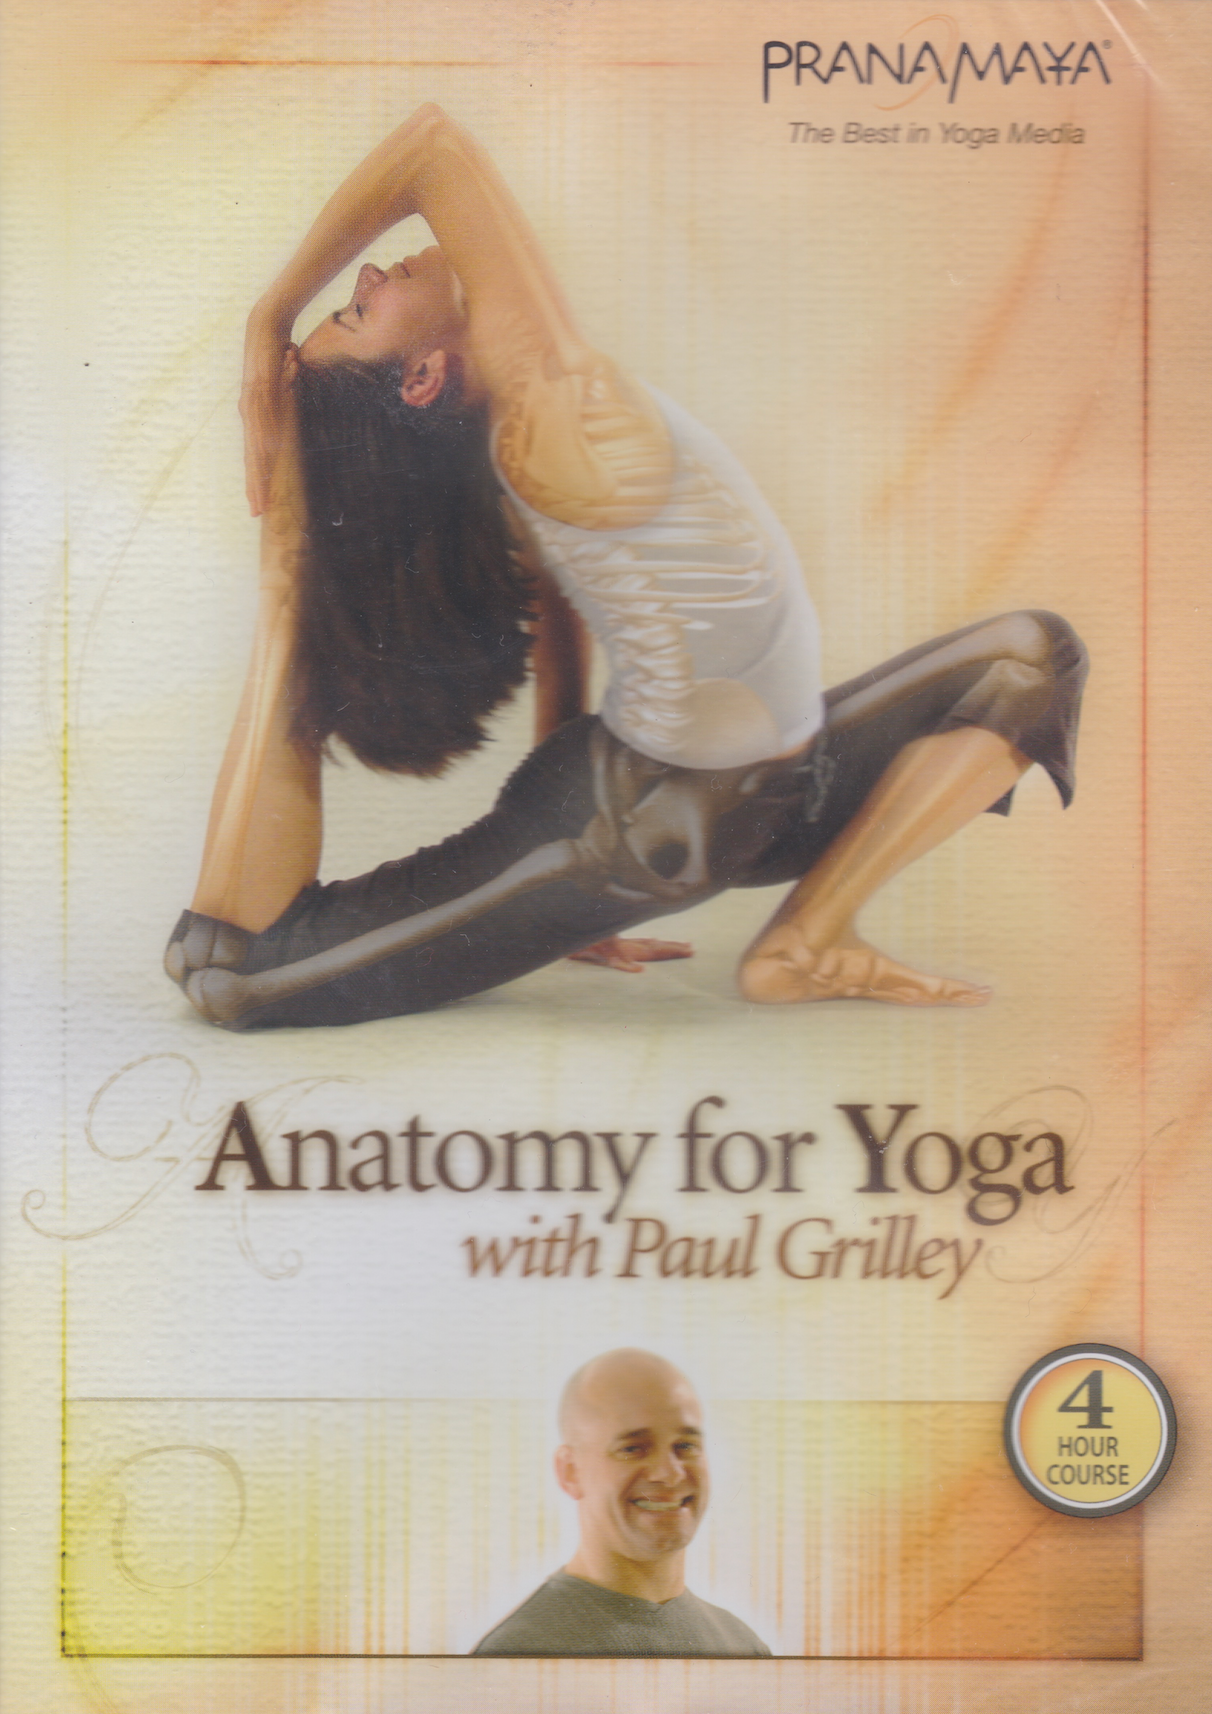 Anatomy for Yoga DVD with Paul Grilley